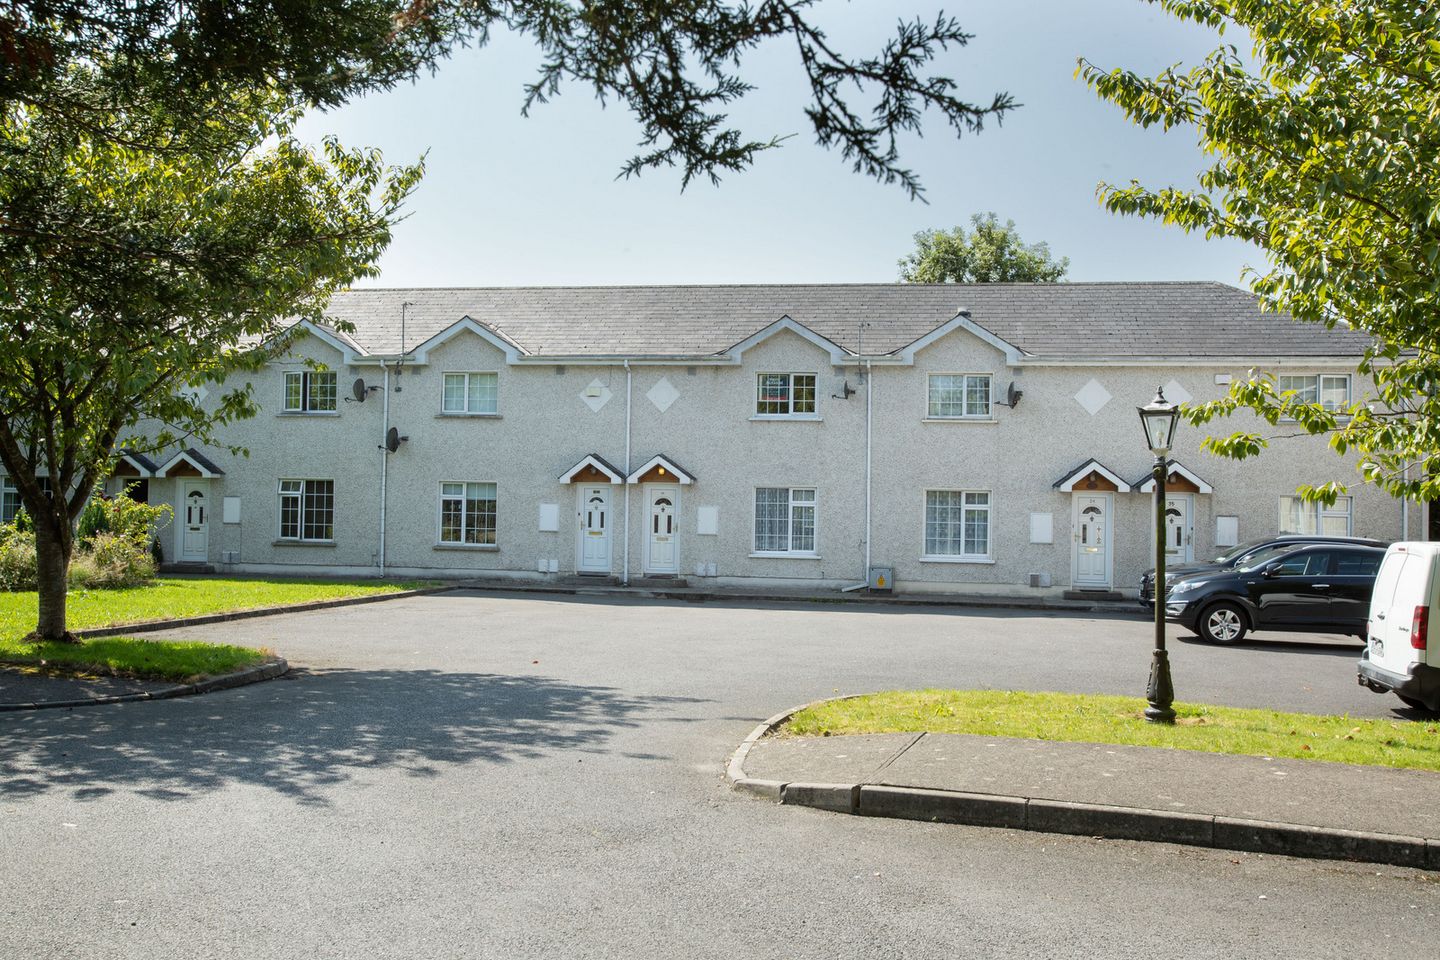 33 The Brosna, Friars Mill Road, Mullingar, Co. Westmeath